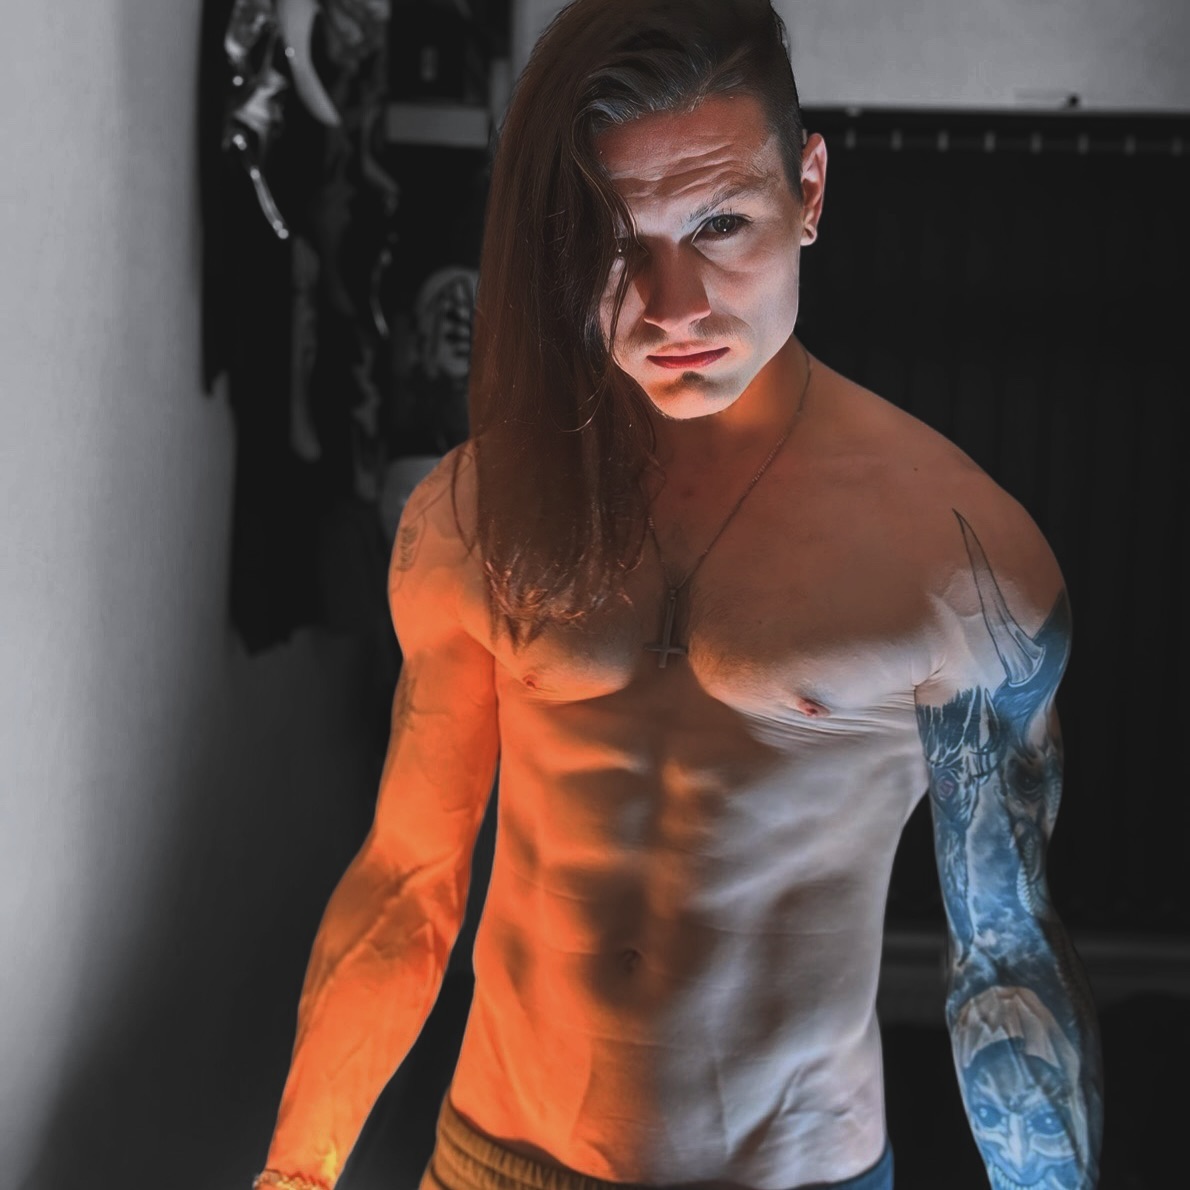 “If it costs your peace, then it’s to expensive.” 
⛓️
⛓️
⛓️
⛓️
⛓️
 #emo #goth #alt #alternative #ink #inked #tattoo #tattooed #guyswithtattoos #gym #fitness #fitnessmotivation #abs #sixpack #muscle #altmodel #fashion #altfashion #model #daltonrivers #ruhndanaan #acotar #sarahjmaas #booktok #bookstagram #sleeve #sleevetattoo #books #publishedmodel